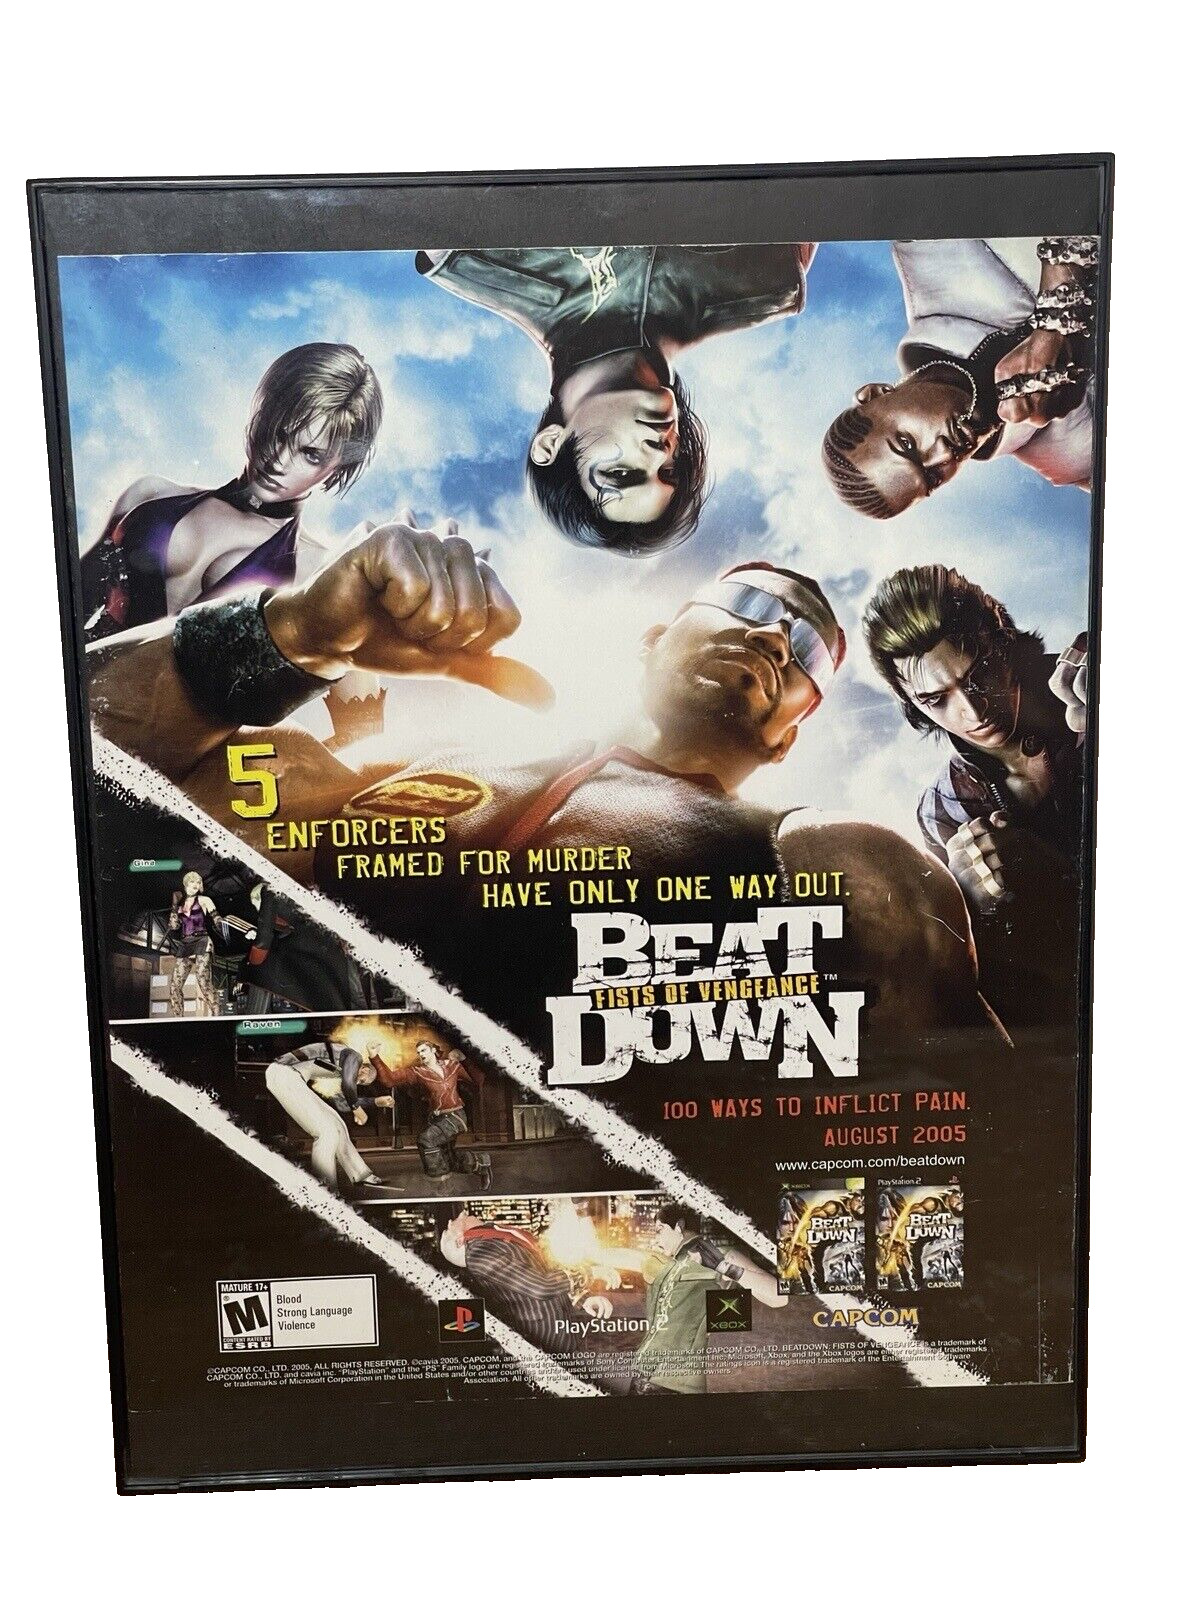 Beat Down: Fists of Vengeance PS2 Xbox Print Ad/Poster Official Game Art Framed